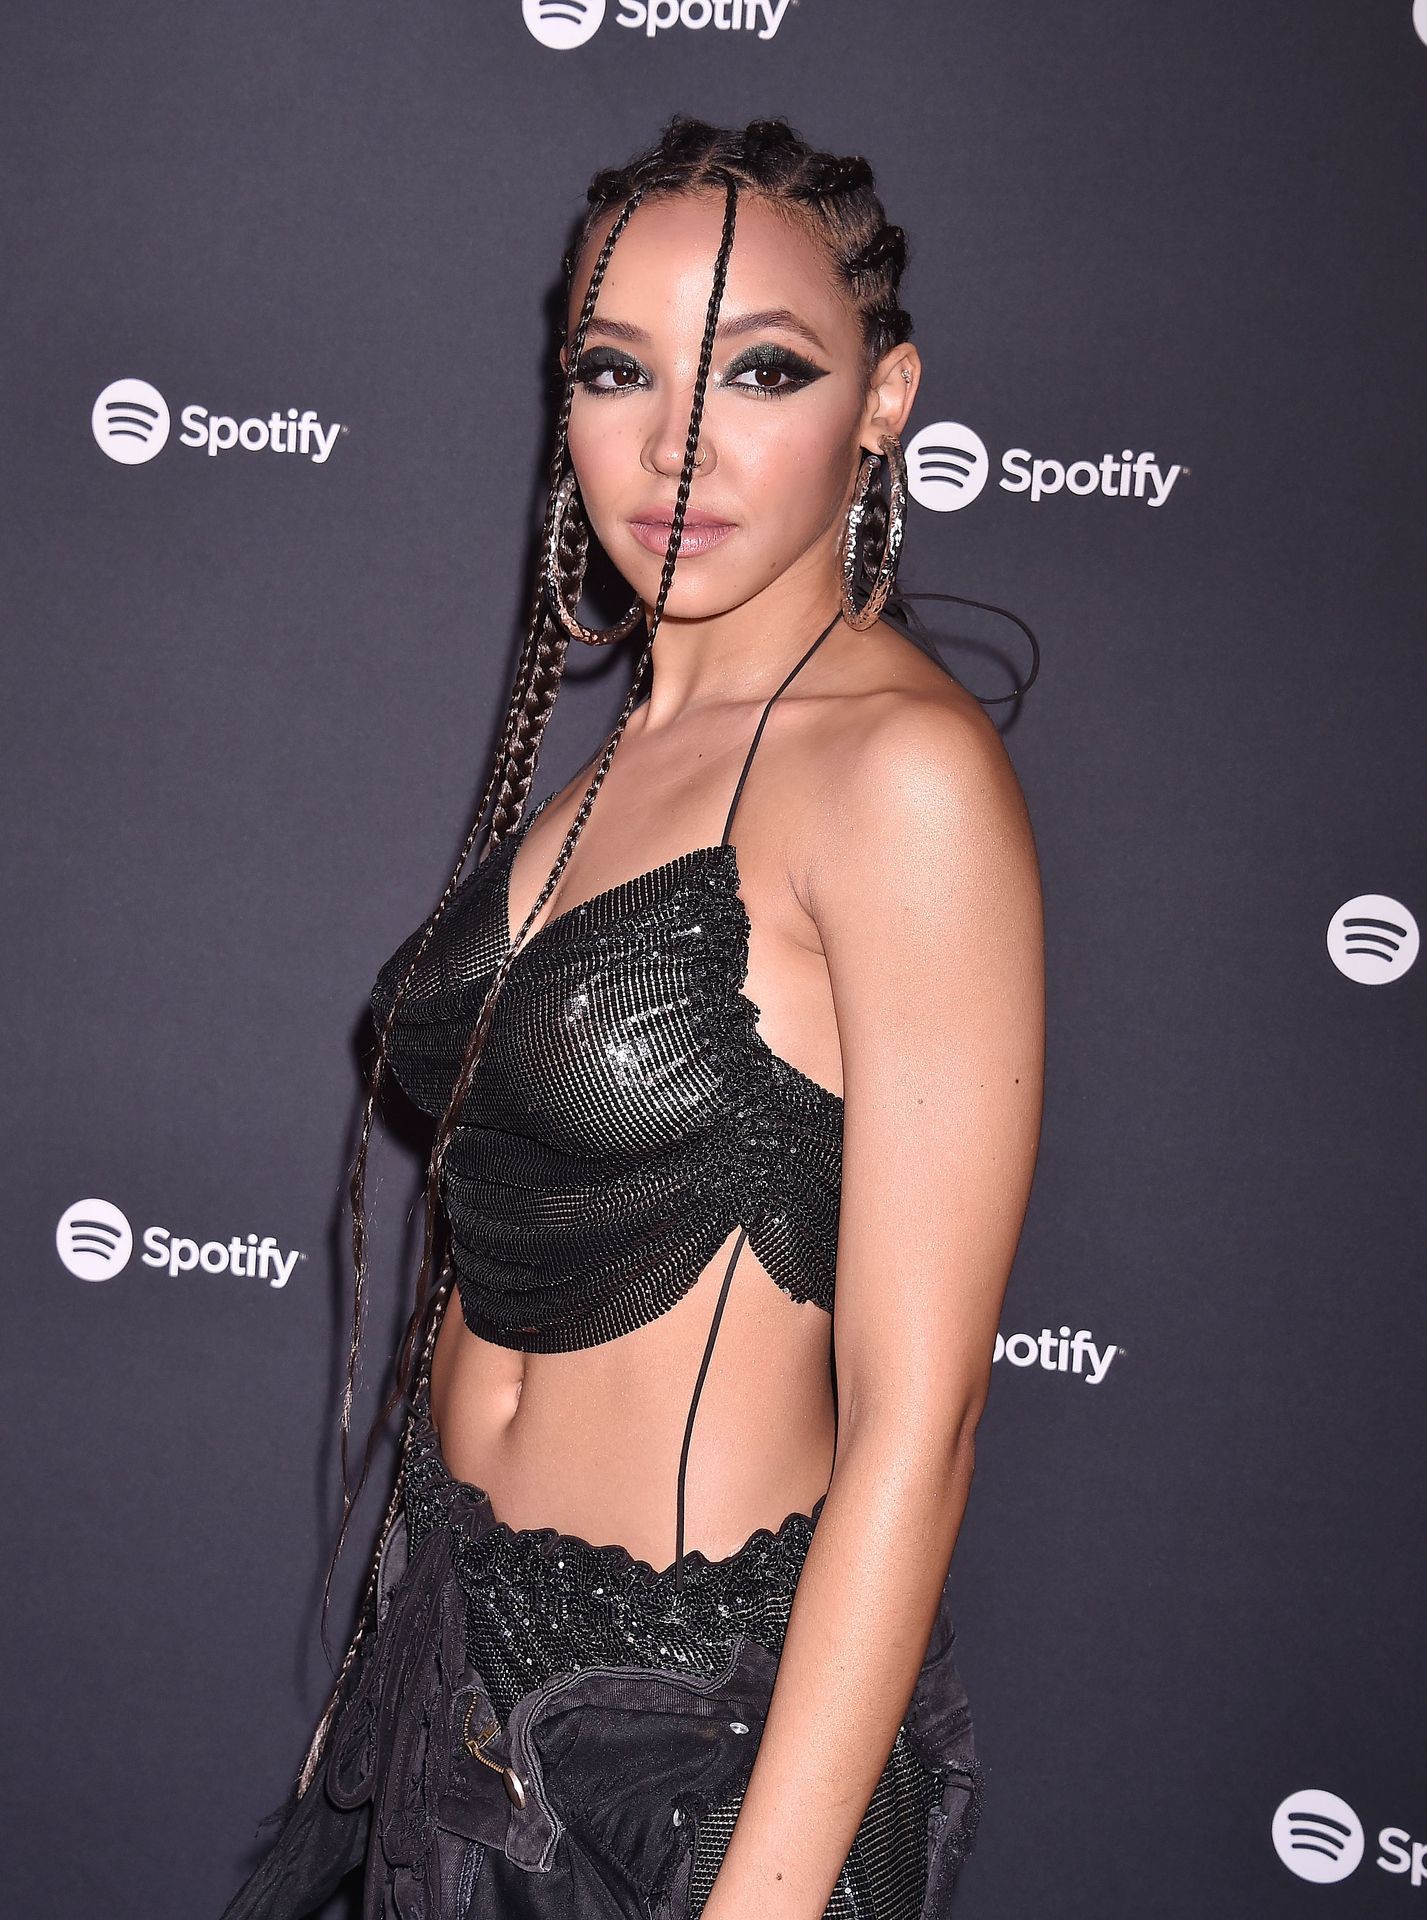 Tinashe - Sexy Braless Boobs in See-Through Top at Spotify Best New Artist ...